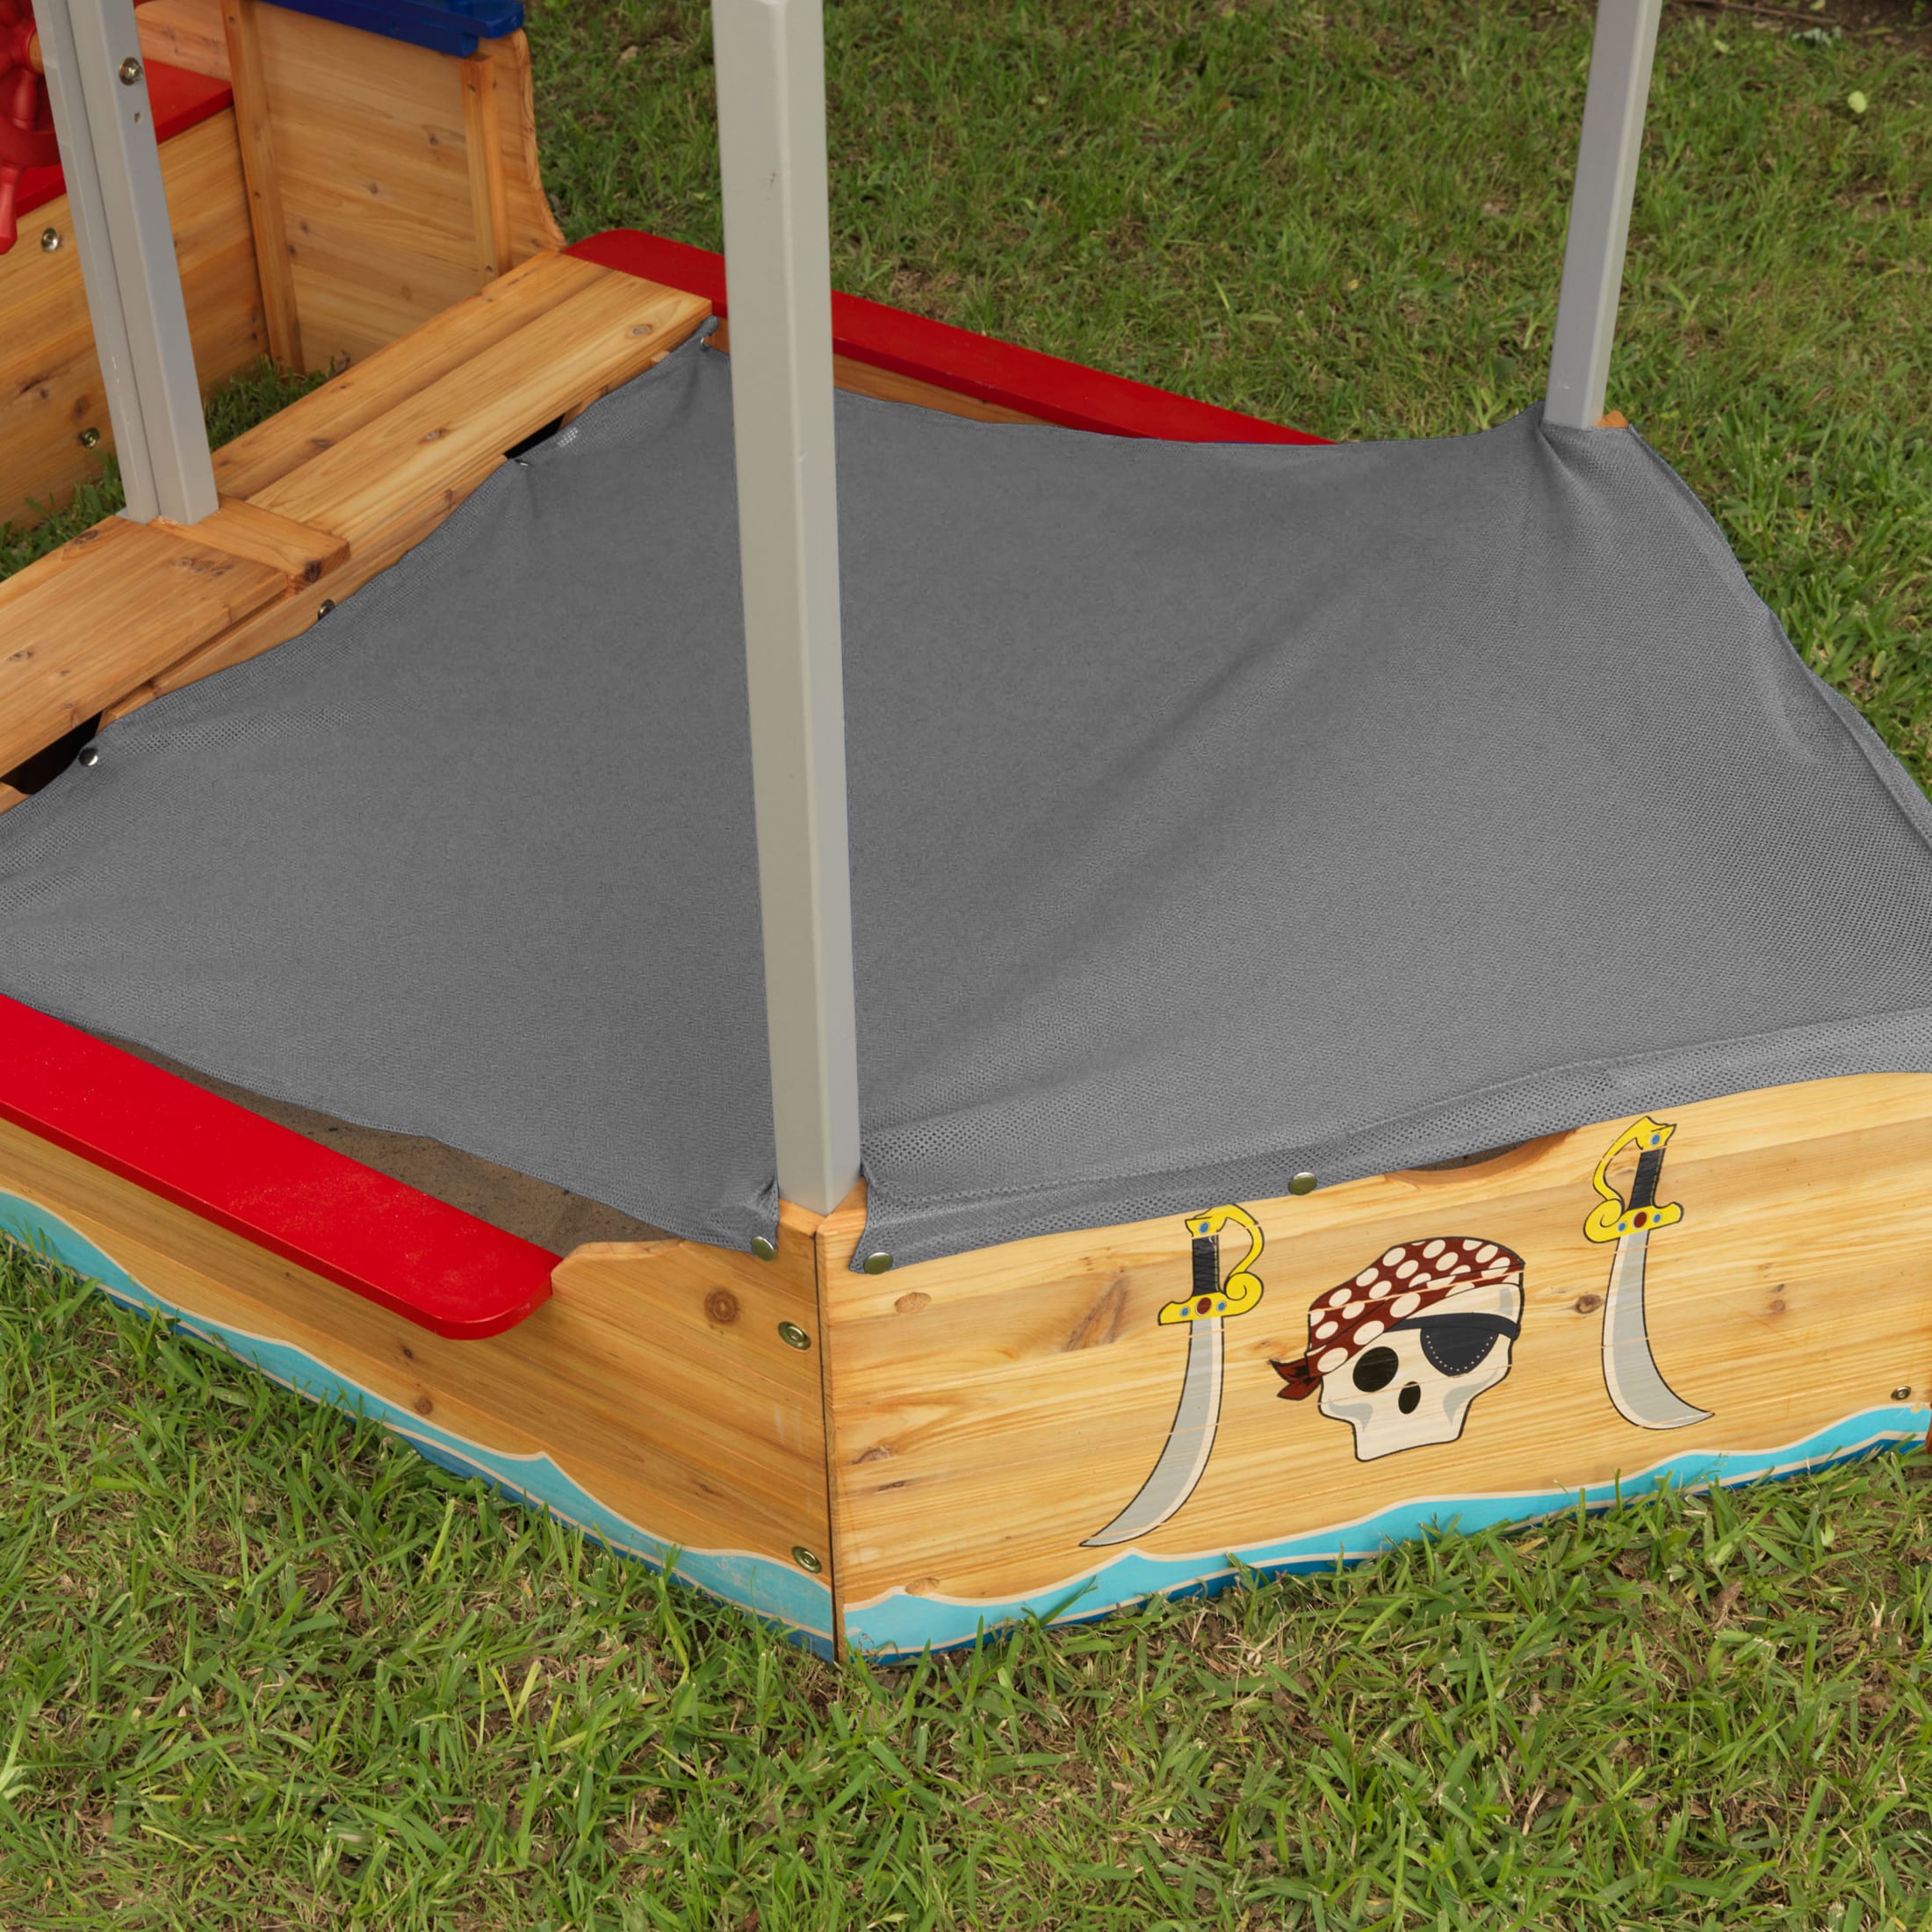 KidKraft Wooden Pirate Sandbox with Canopy, Covered Kid's Sandbox, Blue & Red - image 2 of 5